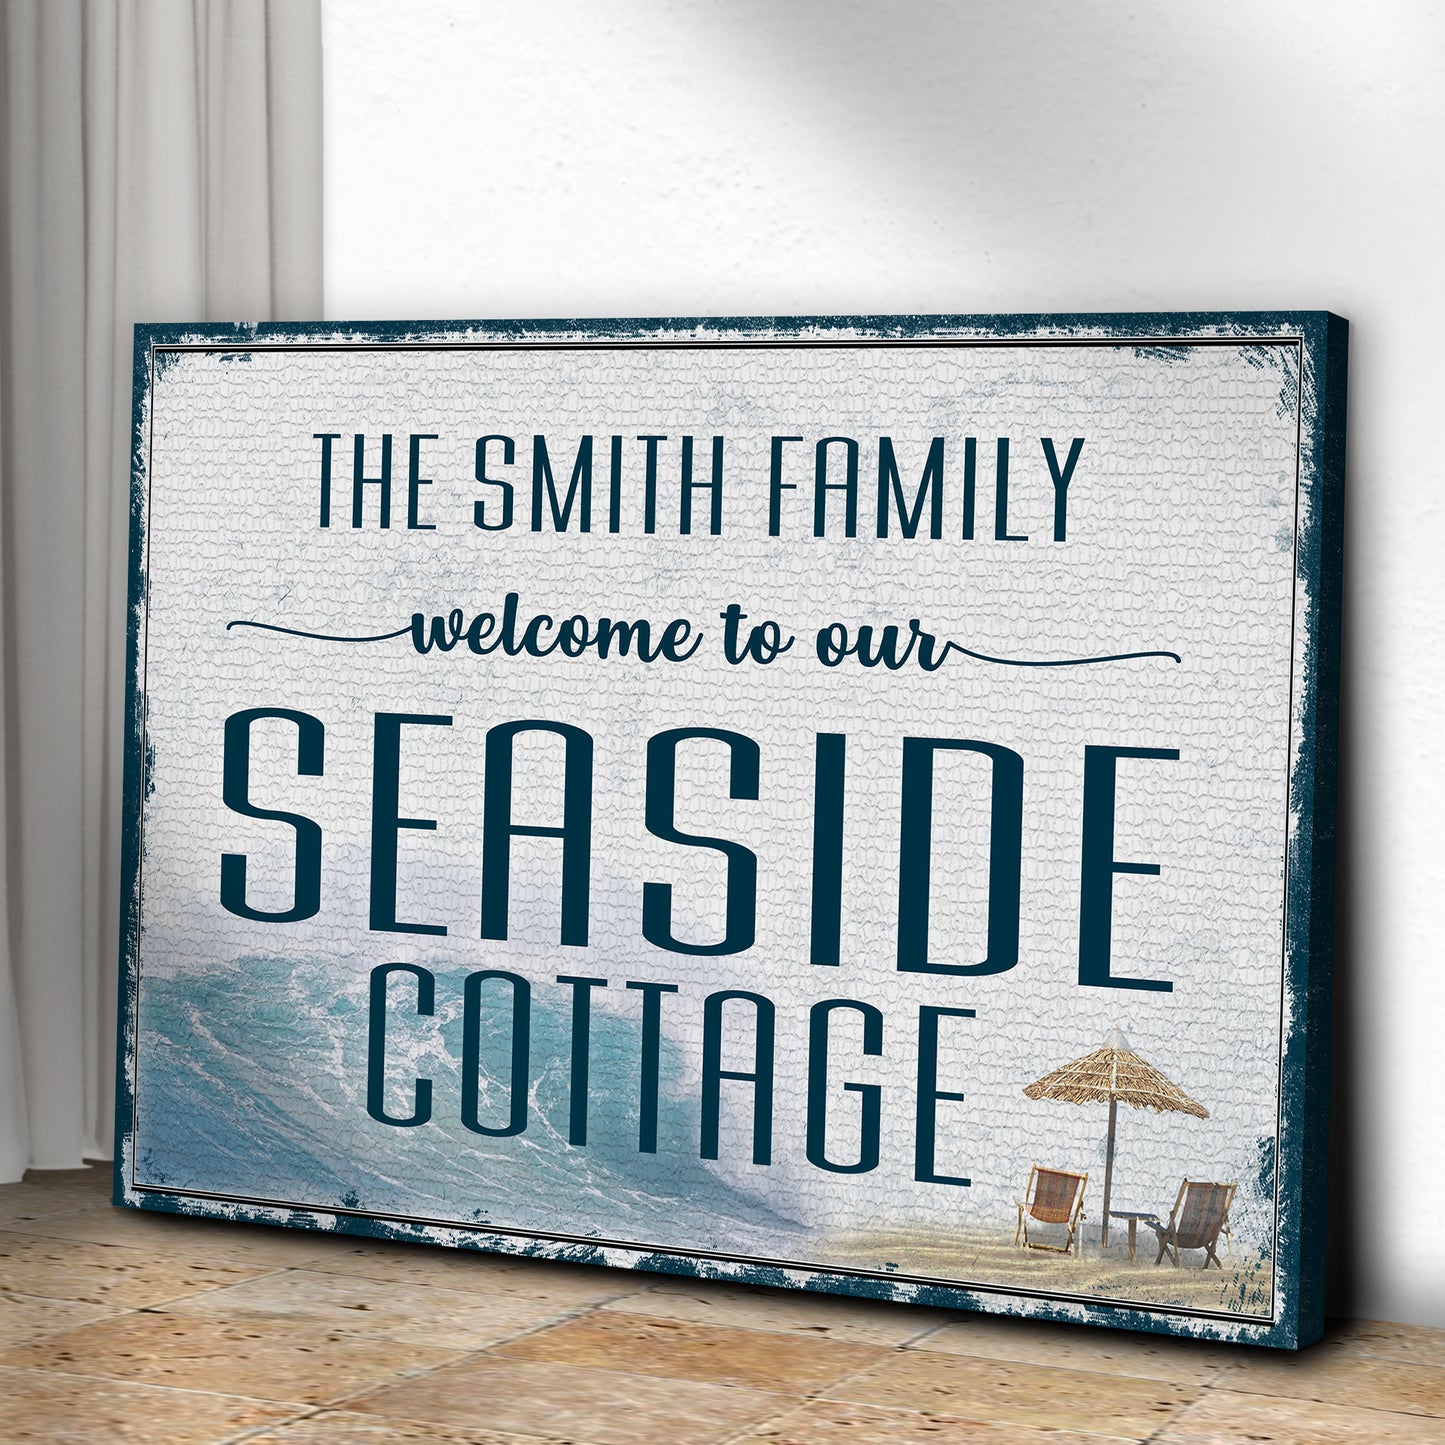 Seaside Cottage Sign - Image by Tailored Canvases